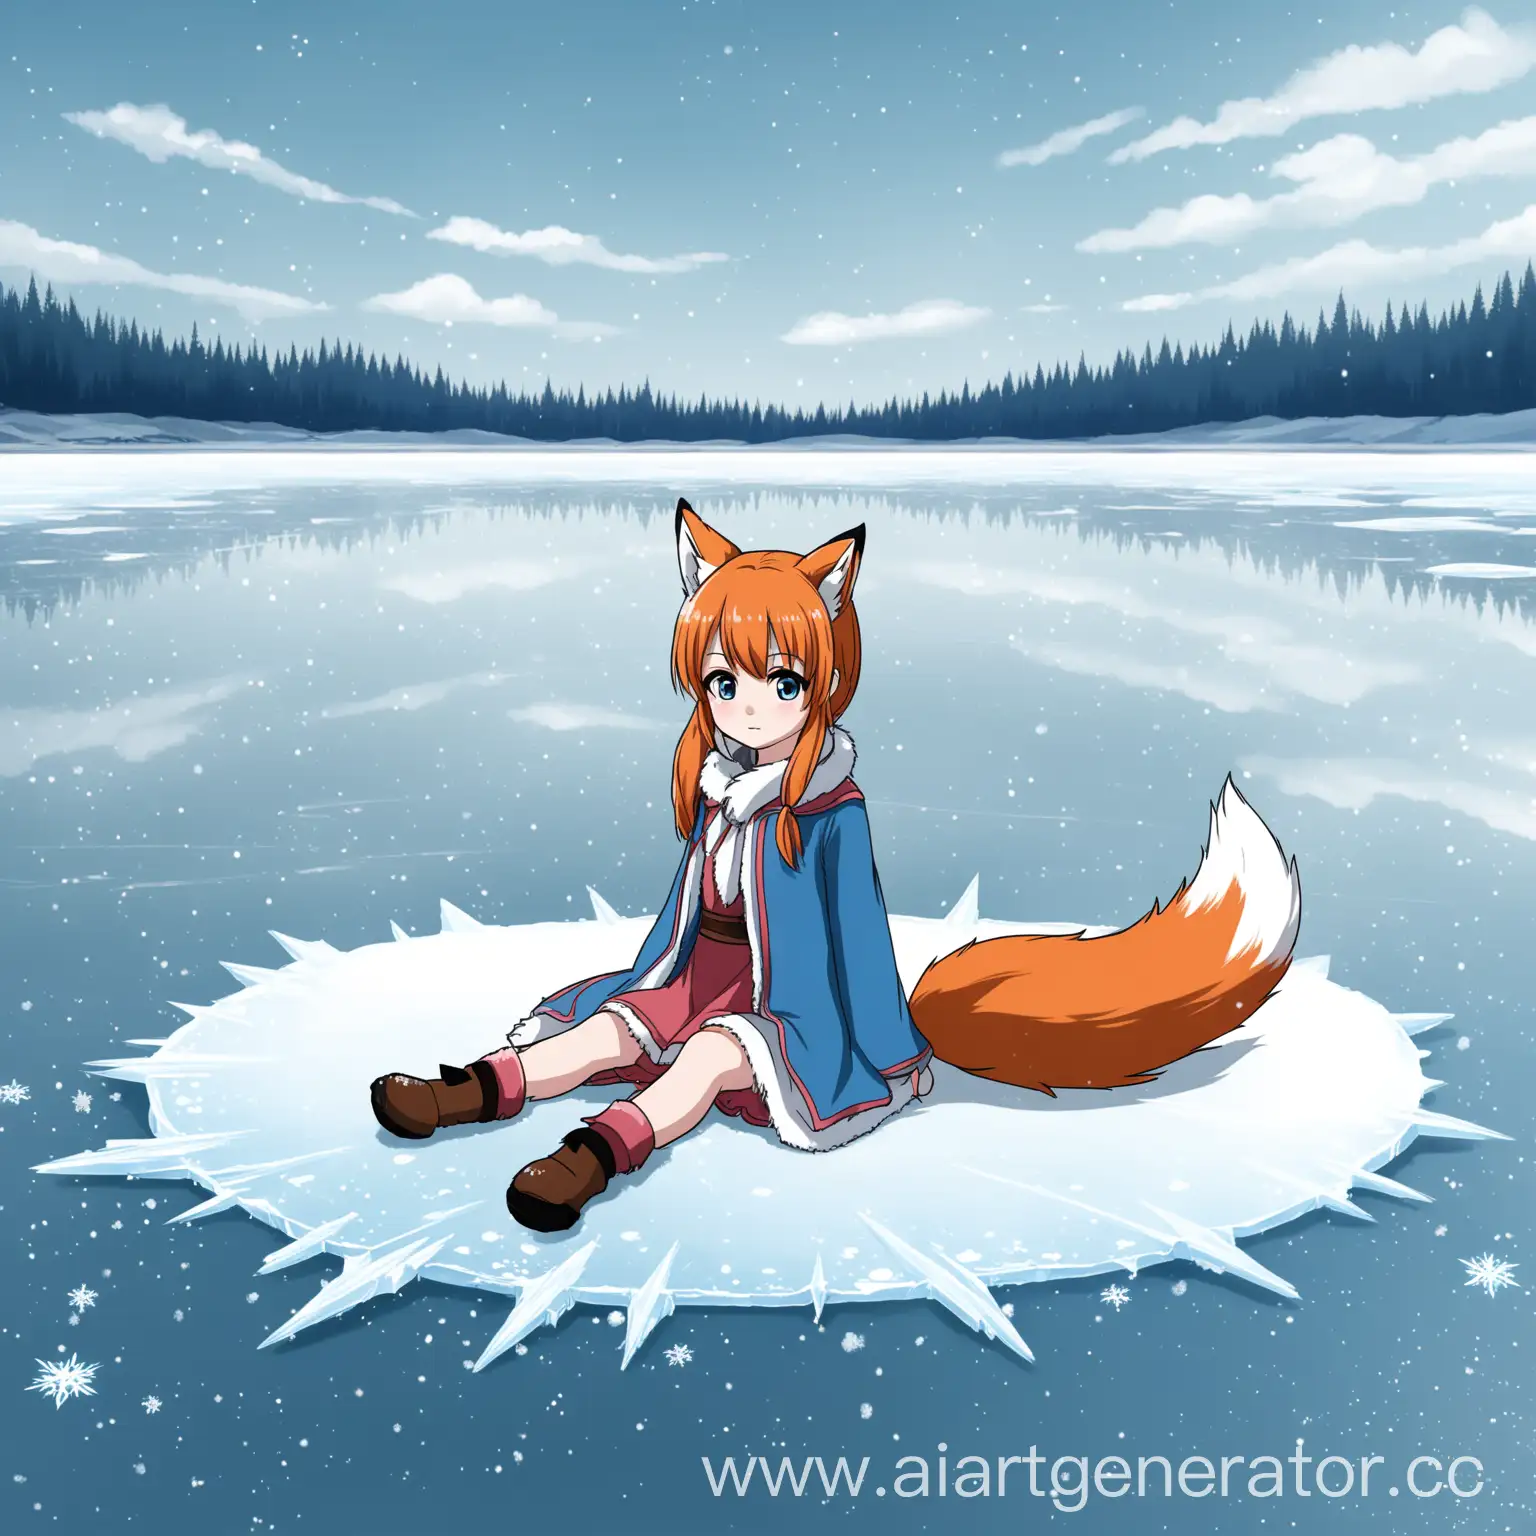 Anime-Style-Girl-with-Fox-Tail-Sitting-on-Frozen-Lake